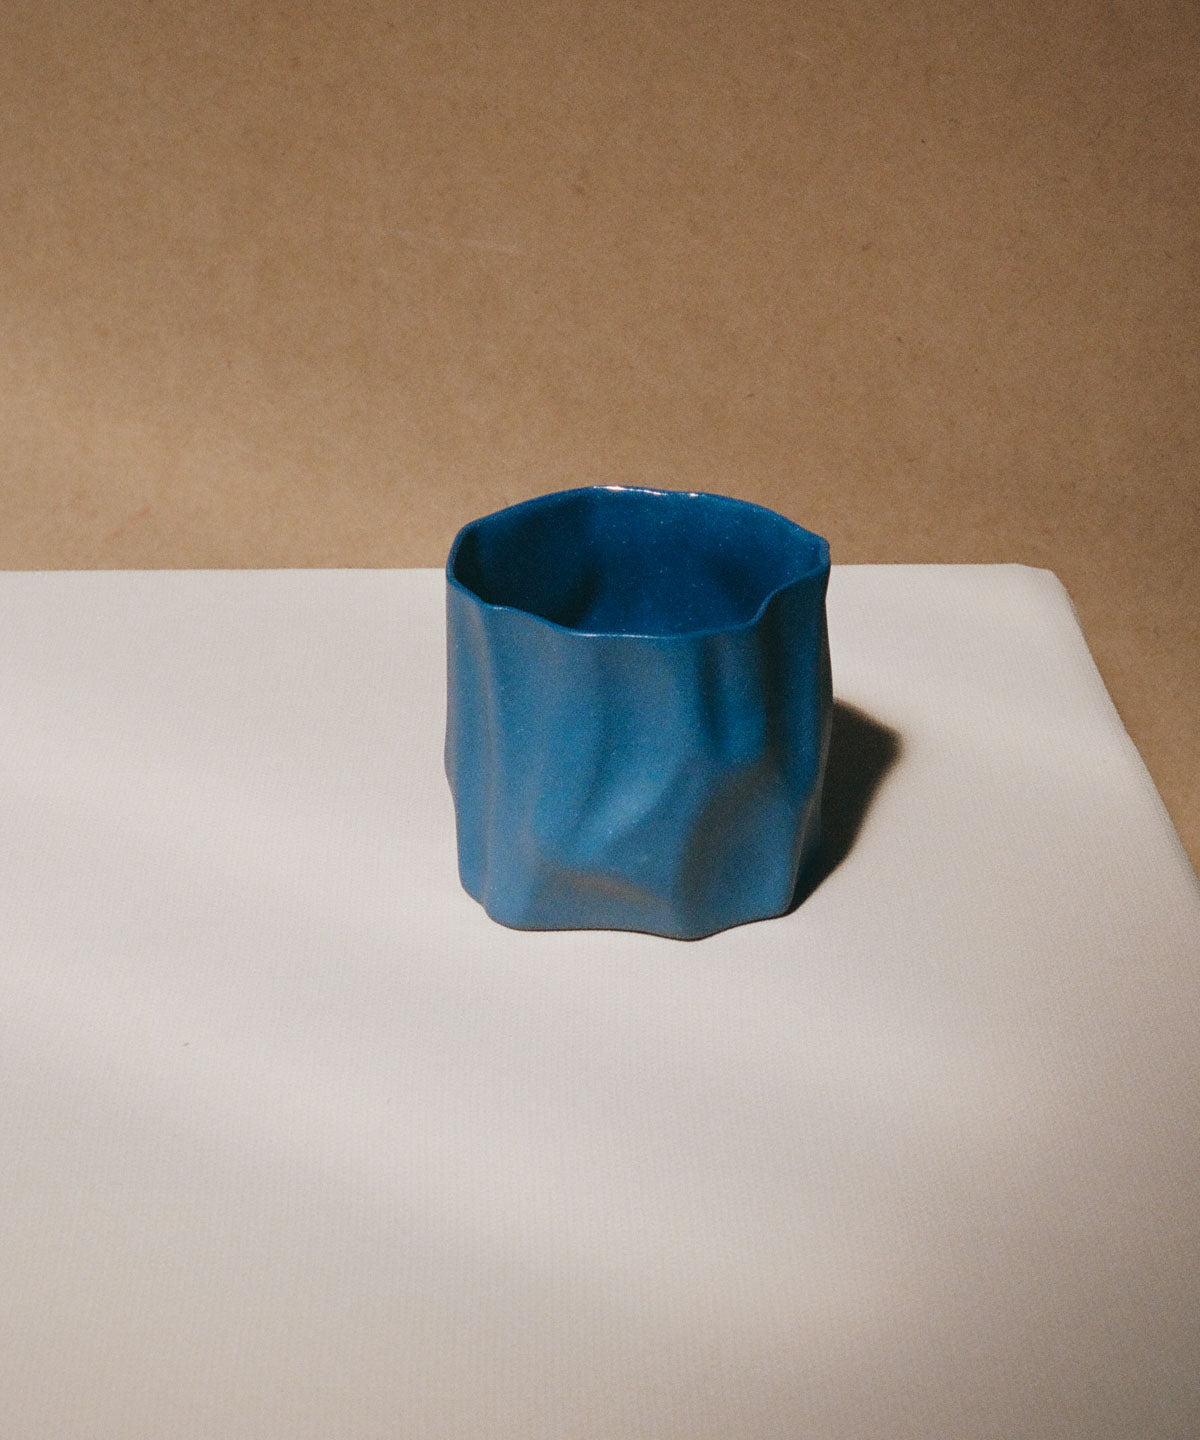 N°010 Cup for Fingers